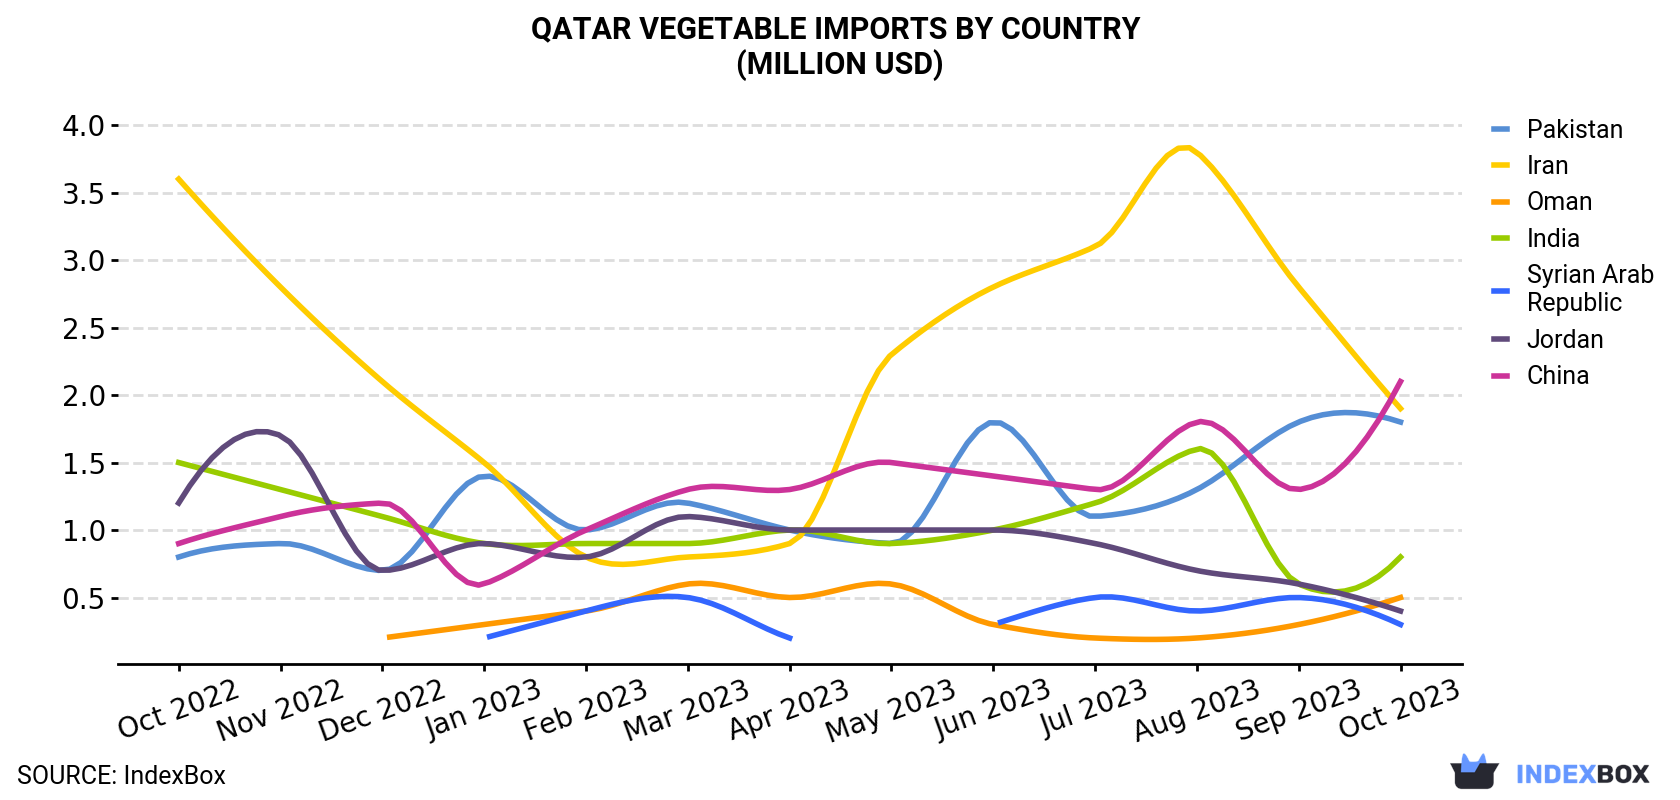 Qatar Vegetable Imports By Country (Million USD)